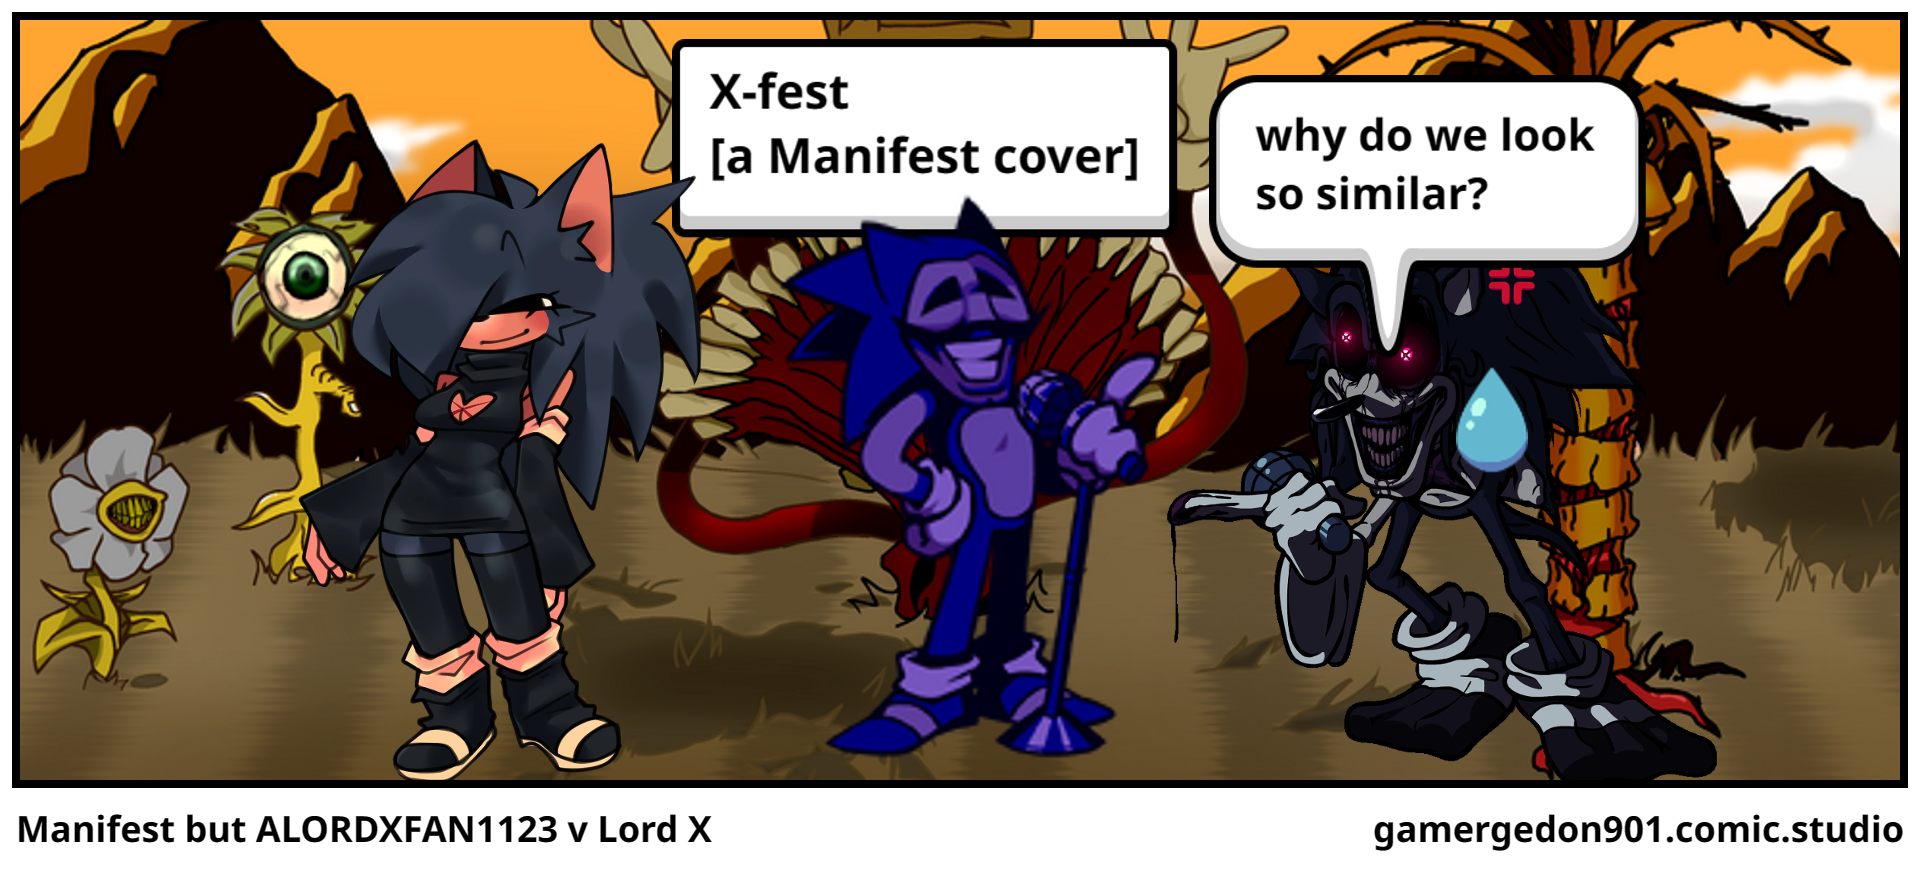 Manifest but ALORDXFAN1123 v Lord X